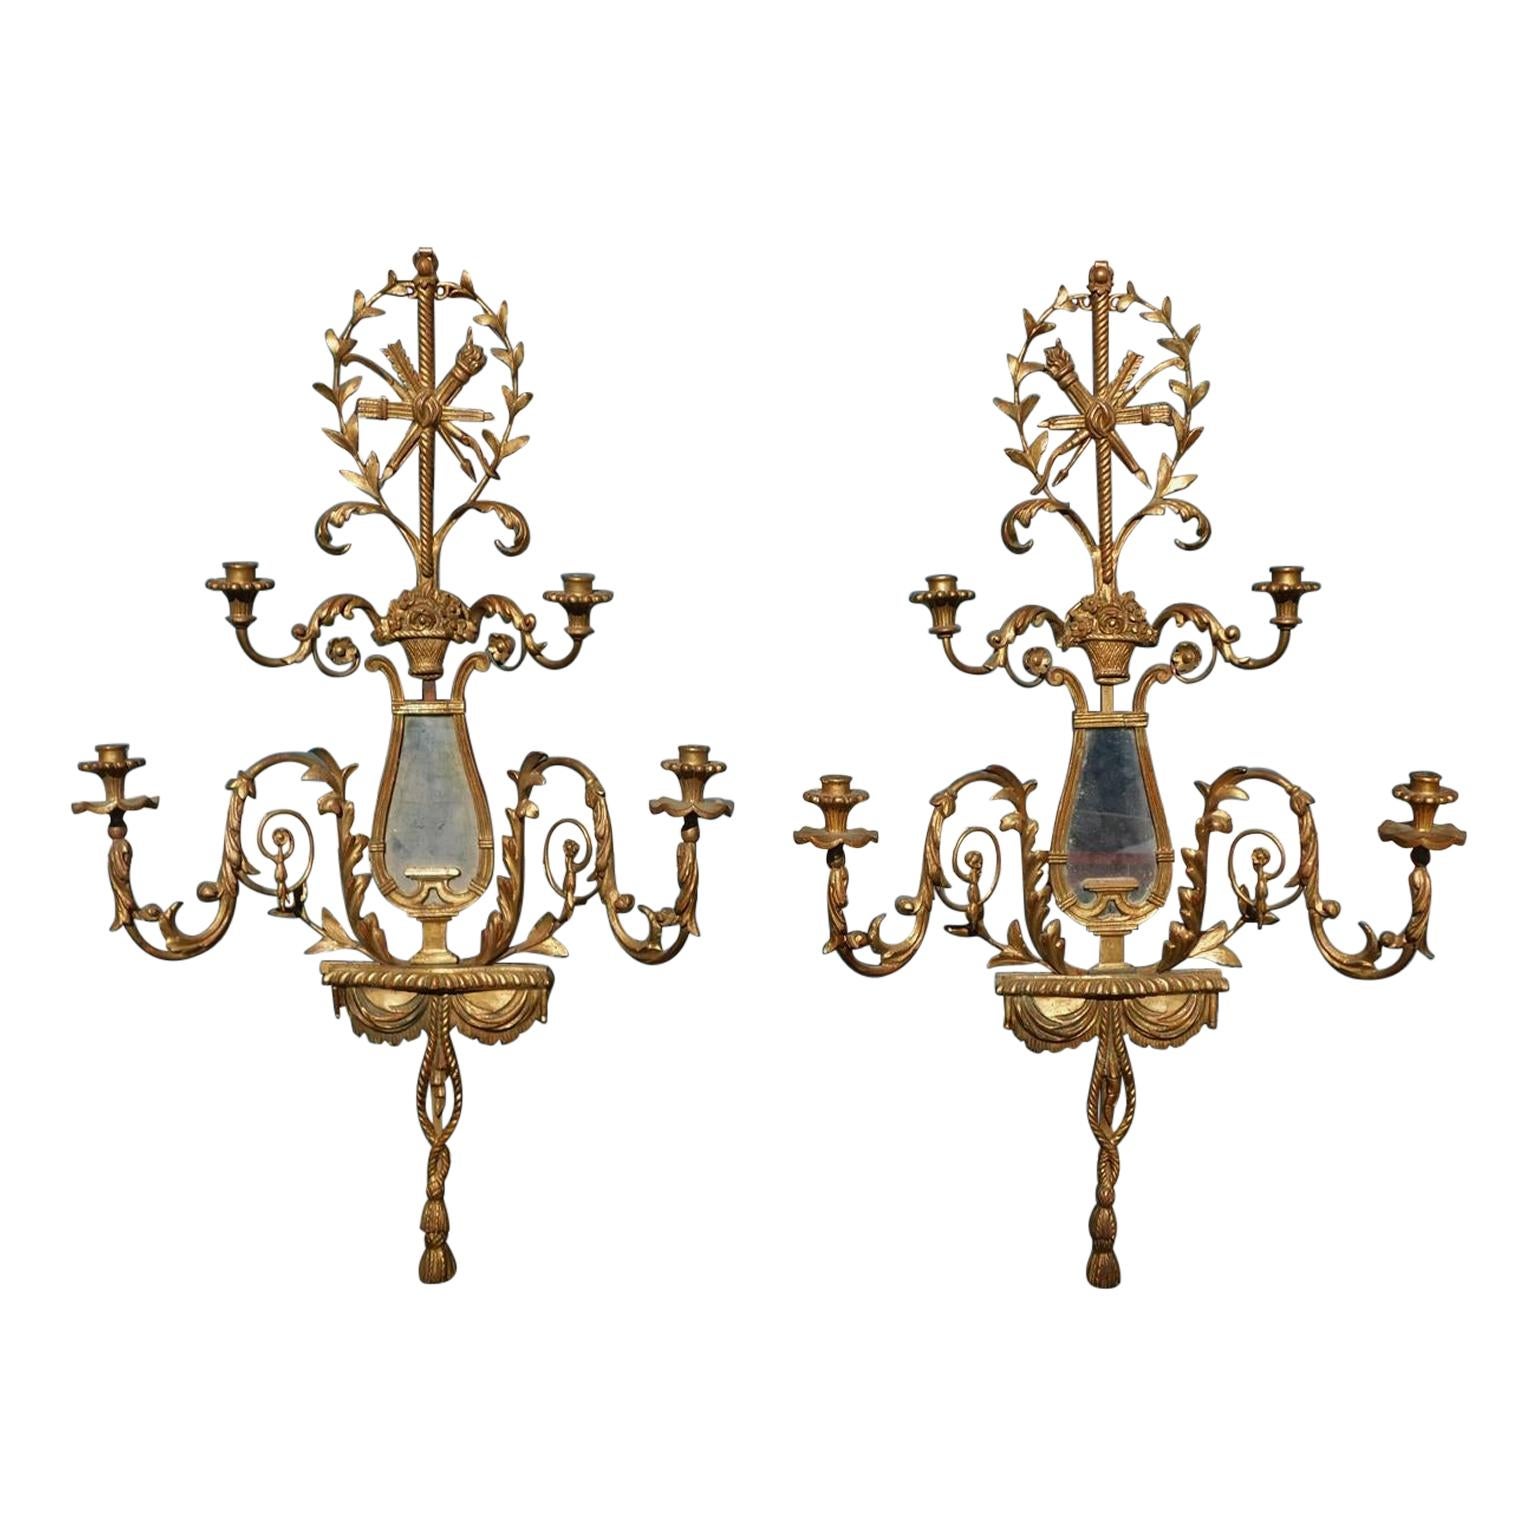 Pair of French Gilt Wood & Gesso Four Arm Foliage & Mirror Wall Sconces, C. 1820 For Sale